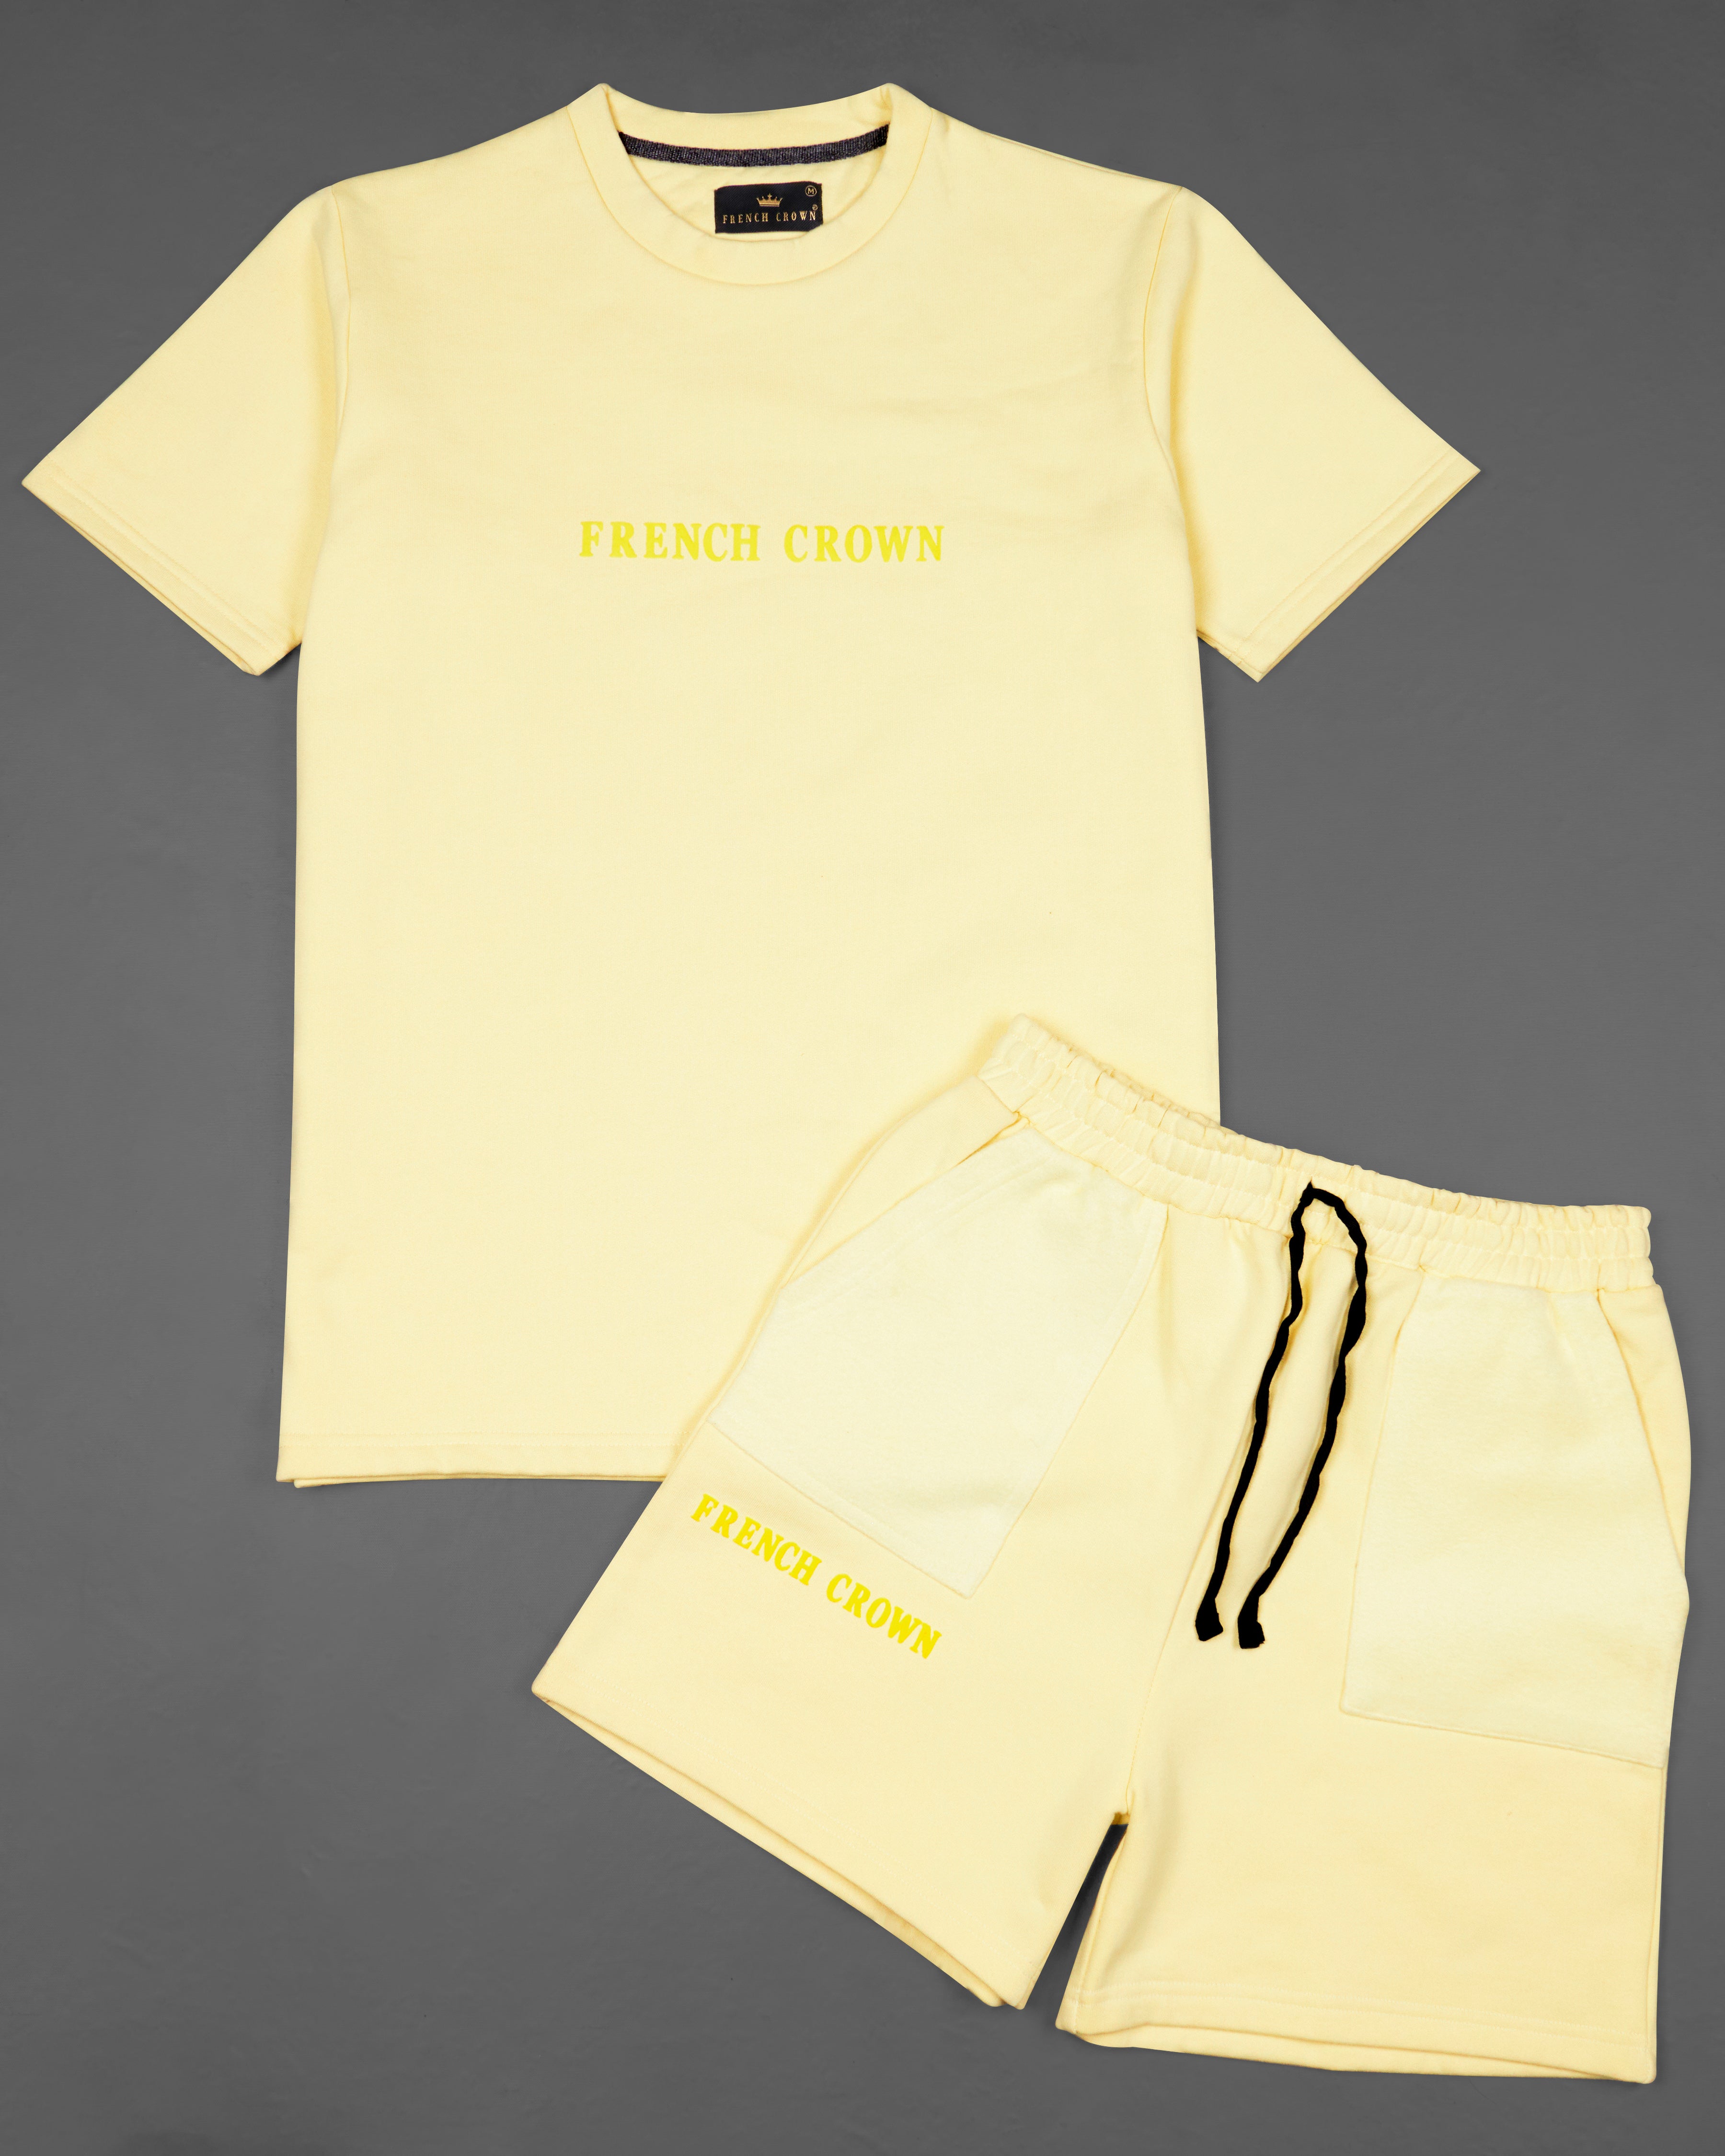 Beeswax Yellow Premium Cotton T-shirt with Shorts Combo TS697-SR172-S, TS697-SR172-M, TS697-SR172-L, TS697-SR172-XL, TS697-SR172-XXL